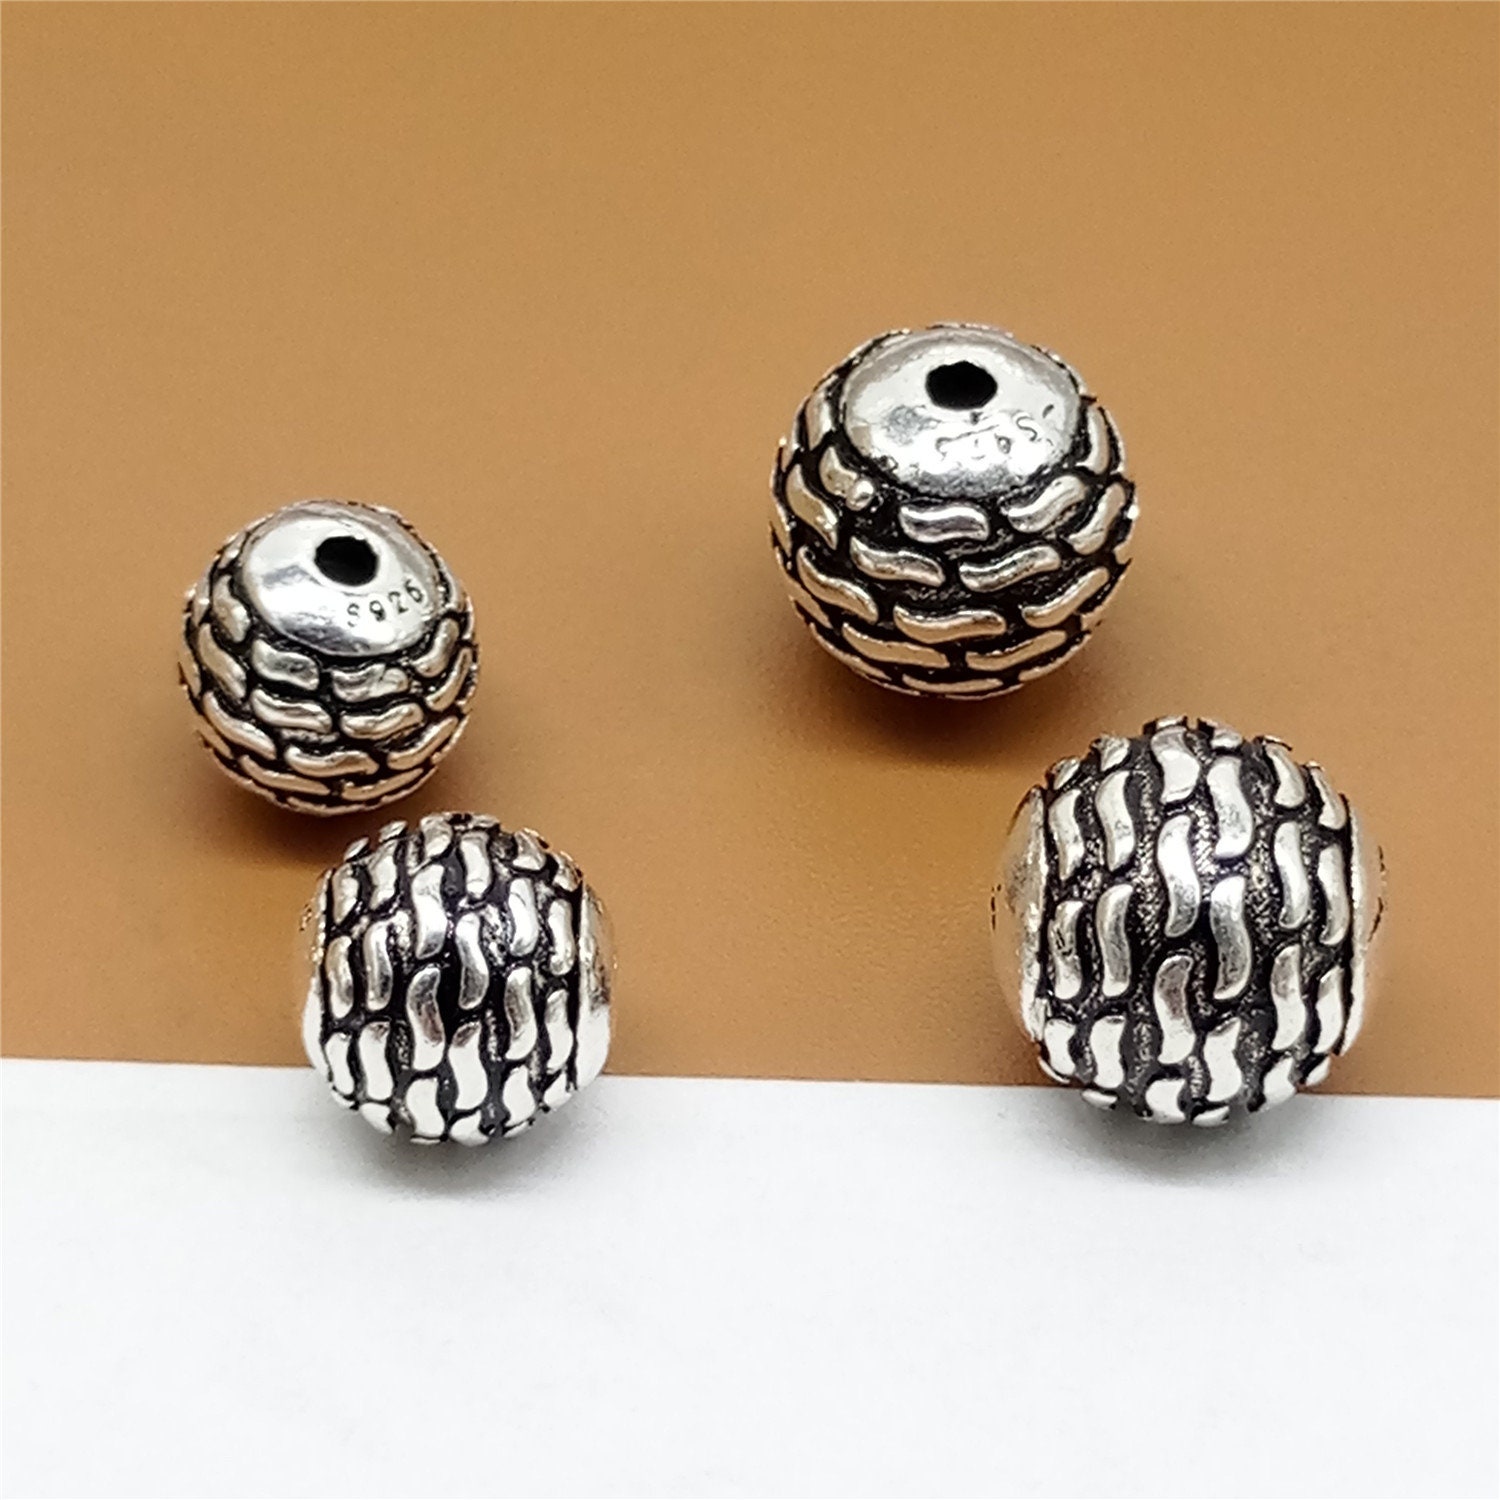 925 Sterling Silver Beads for Jewelry Making 50Pcs S925 Silver Loose Beads  Smooth Round Silver Beads for Stackable Bracelet Jewelry Craft Making(Made